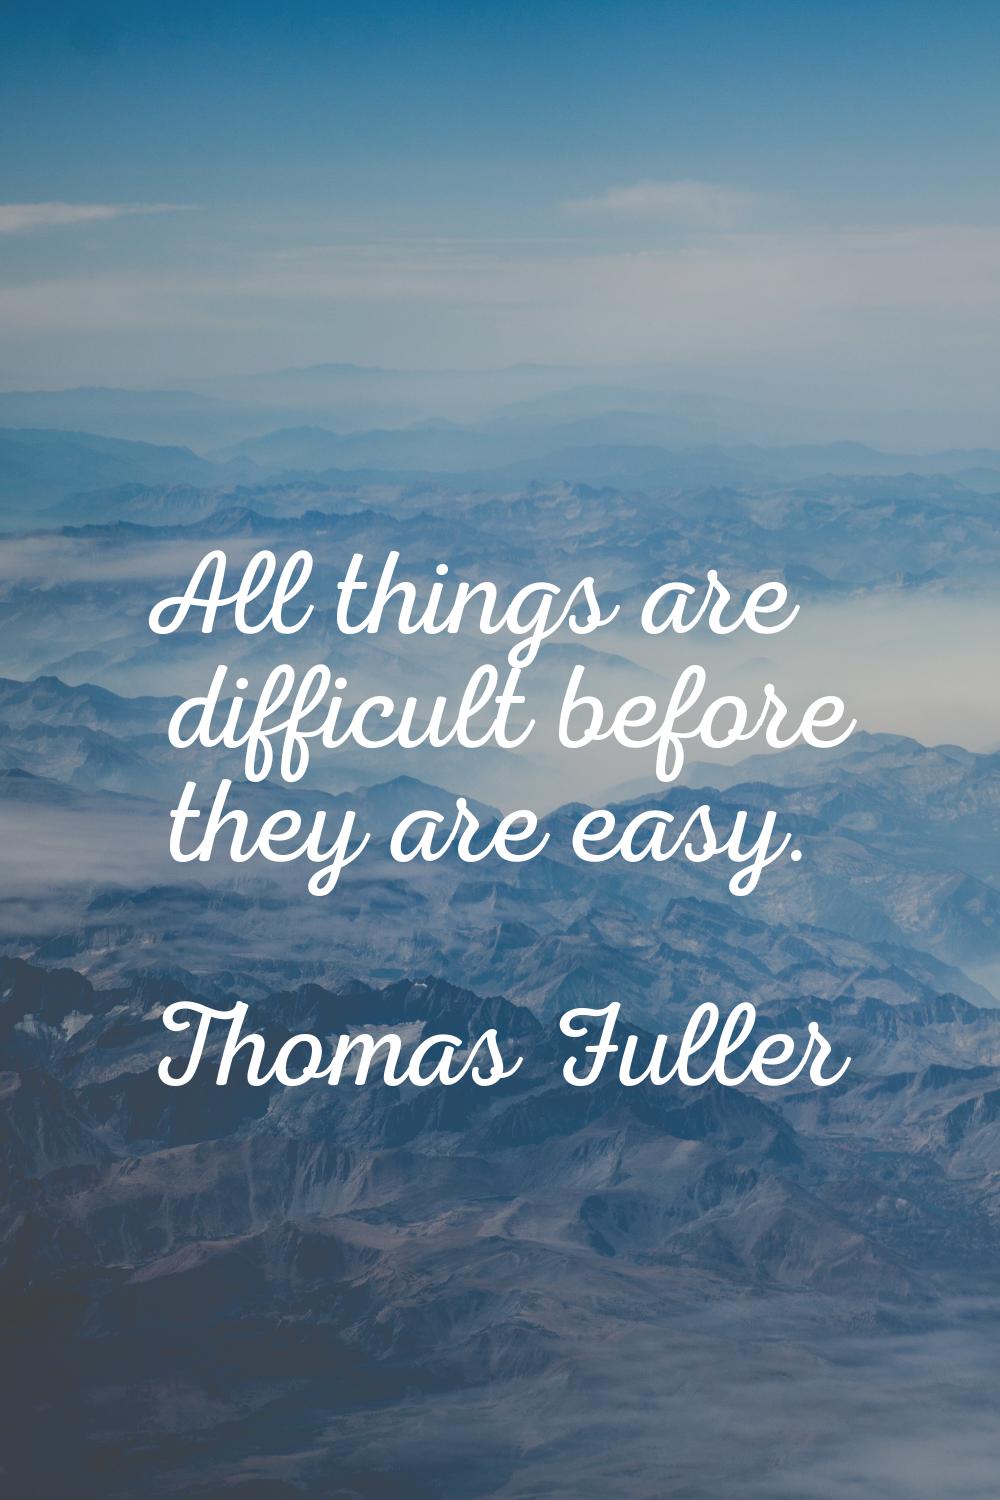 All things are difficult before they are easy.